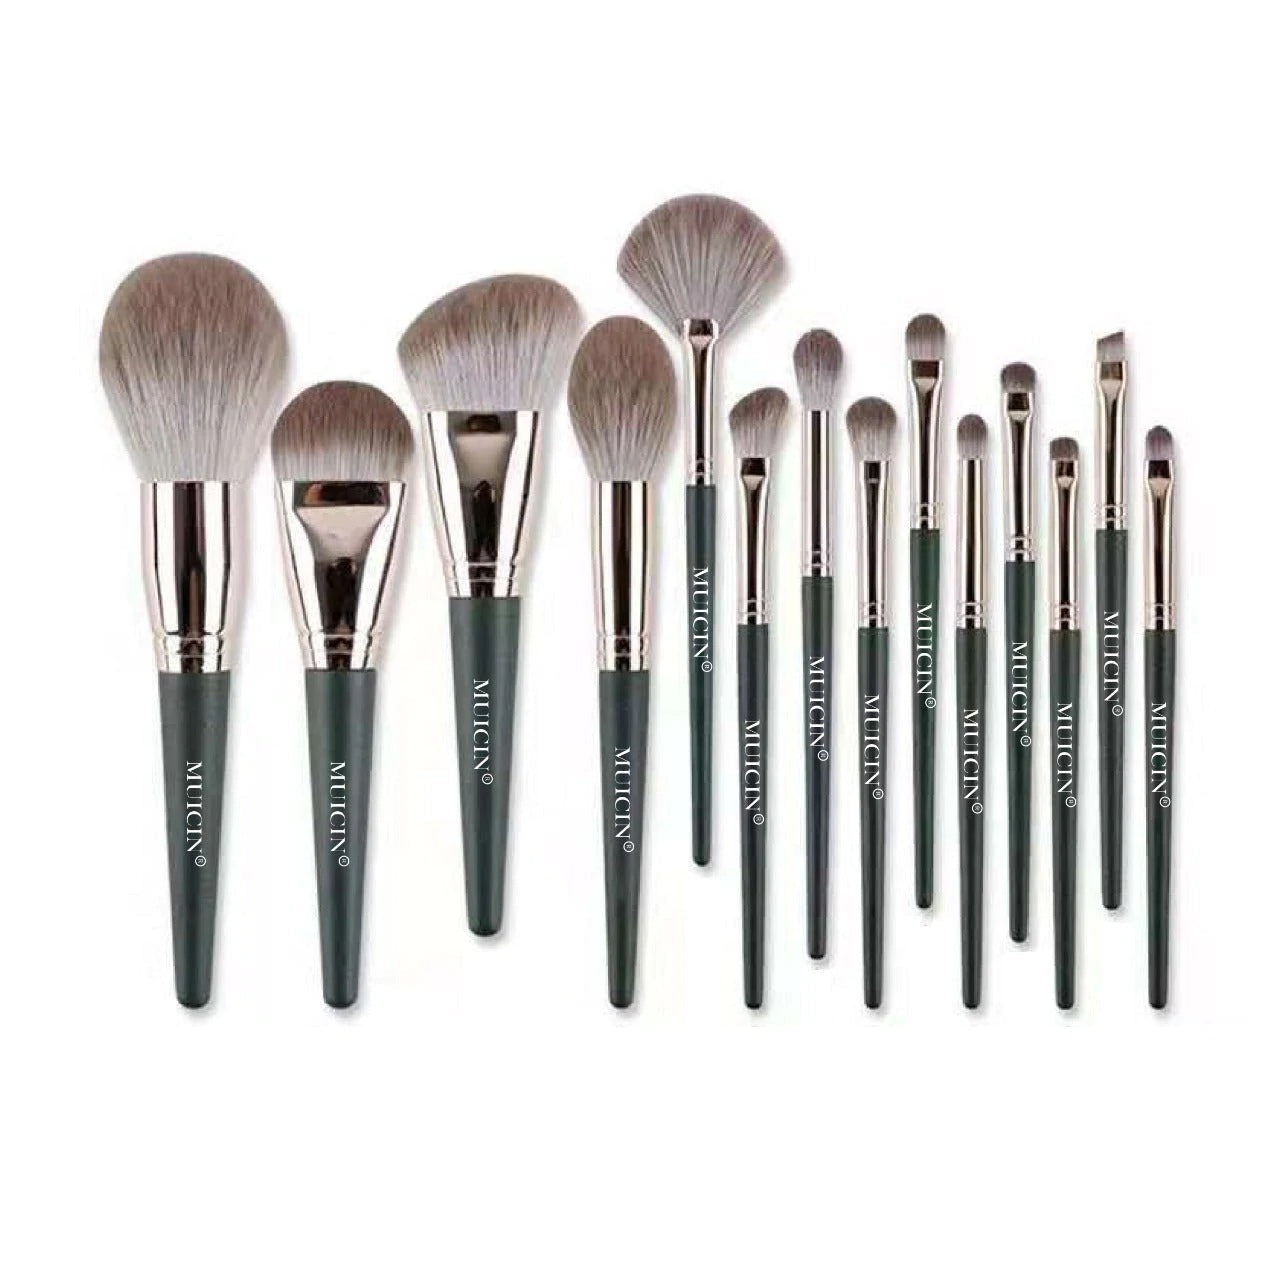 GREEN LEATHER POUCH PROFESSIONAL MAKEUP BRUSH SET - 14 PIECES FOR EVERY LOOK